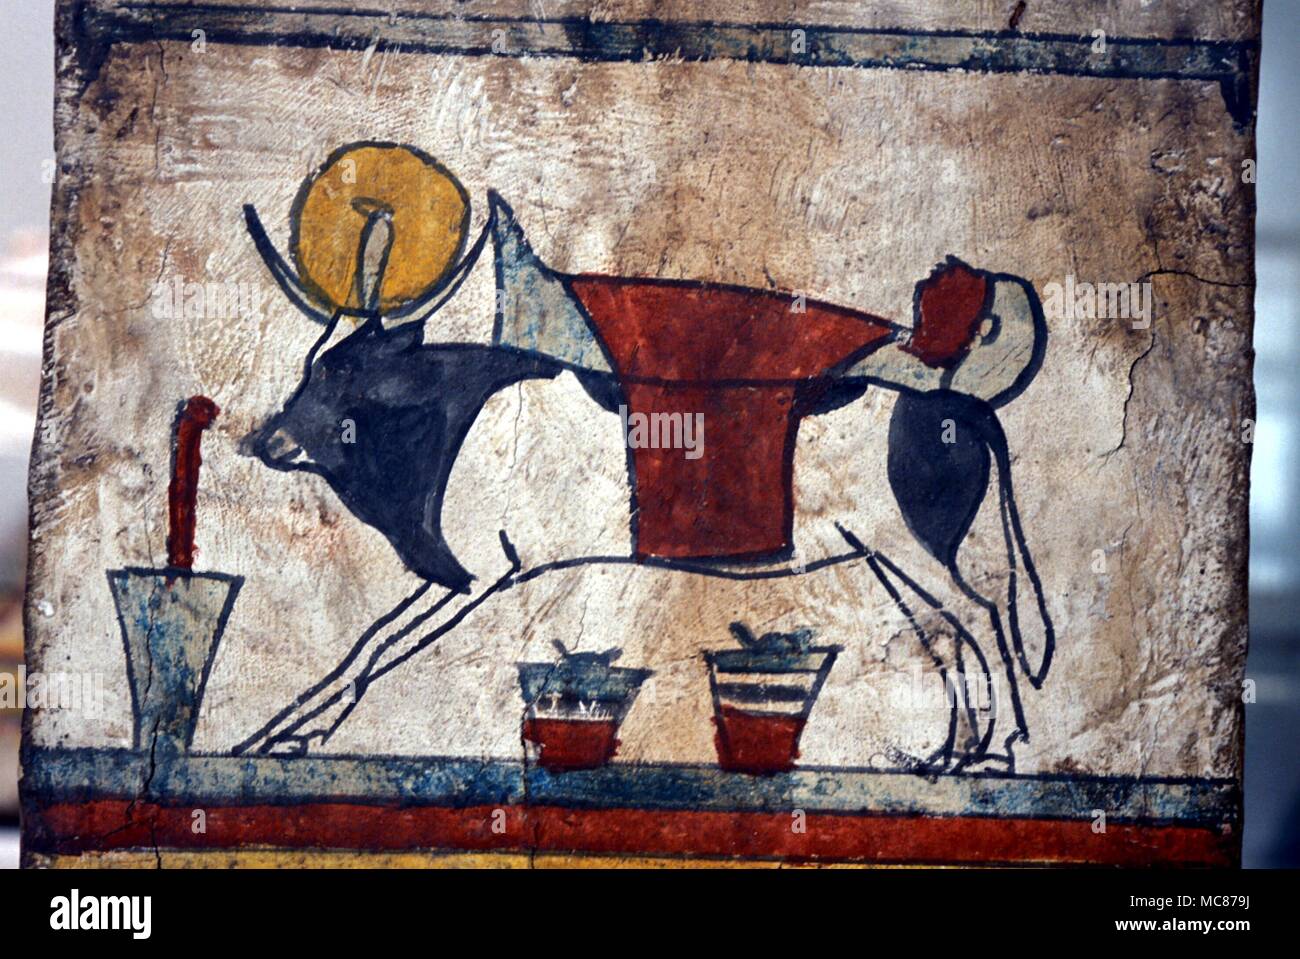 MYTHOLOGY - EGYPTIAN The deceased human carried on the back of the psychopomp bull, Apis. From a mummy case of circa 1,500 BC. Stock Photo